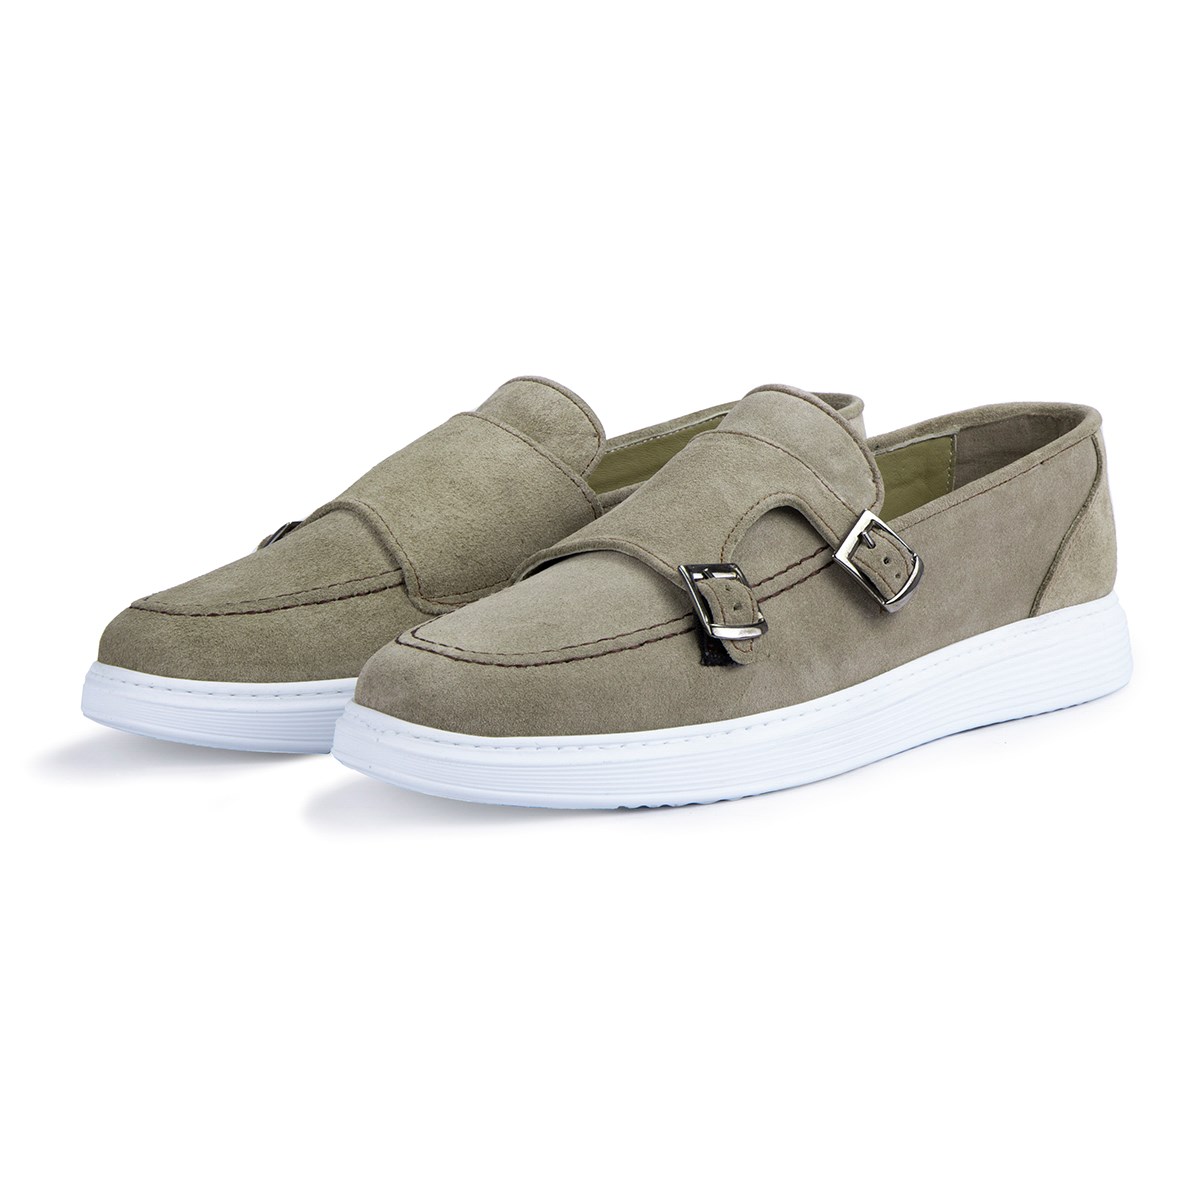 Airy Genuine Leather Suede Loafer